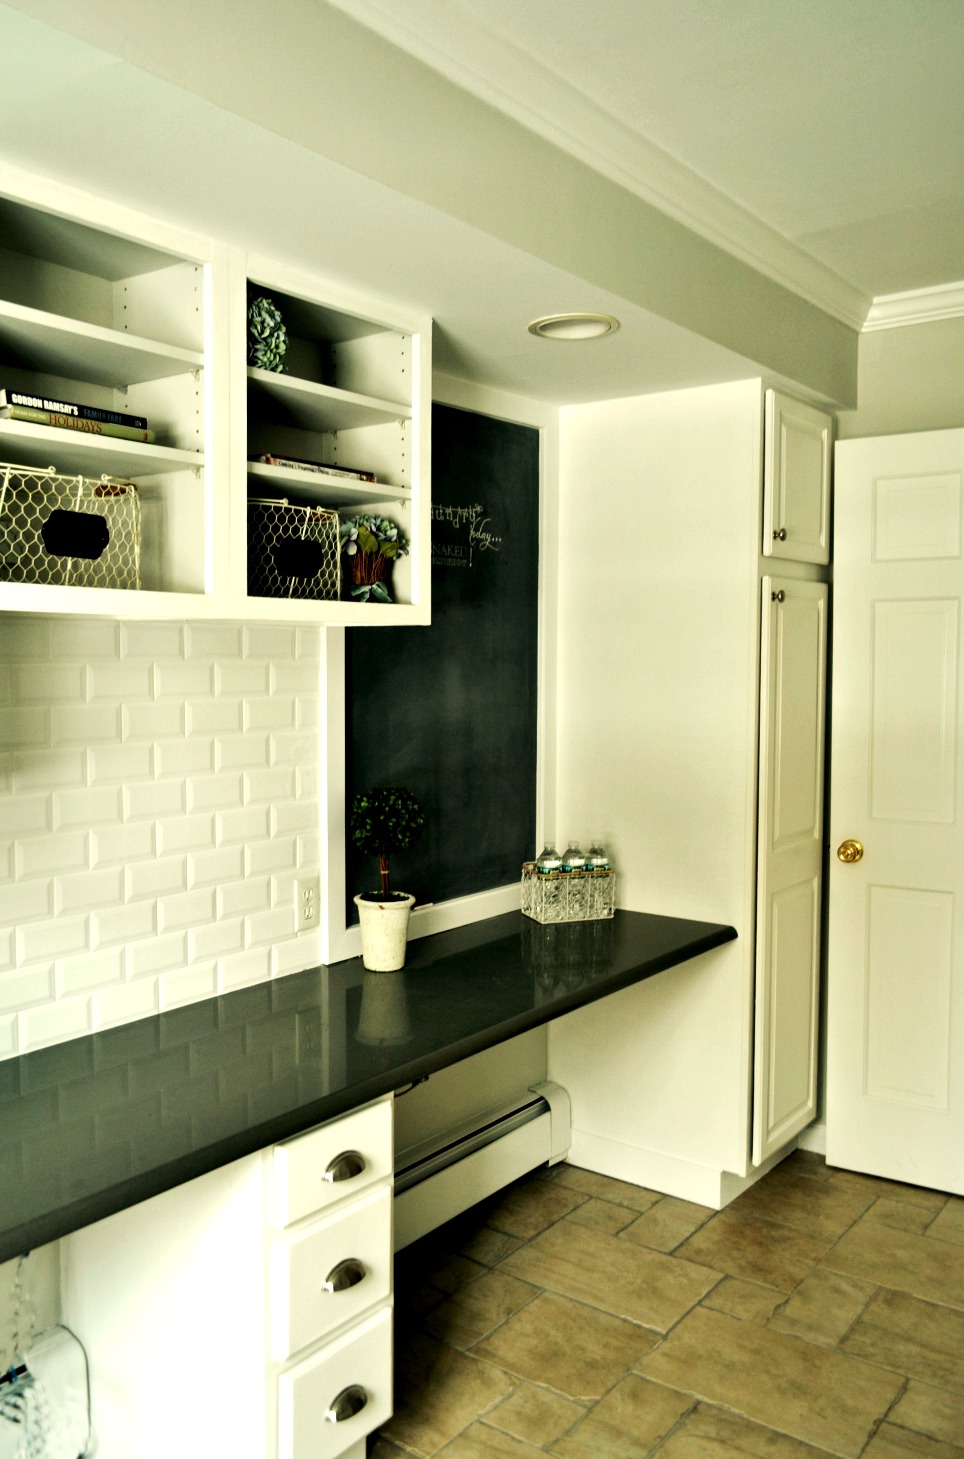 chalkboard in laundryroom with white cabinetry